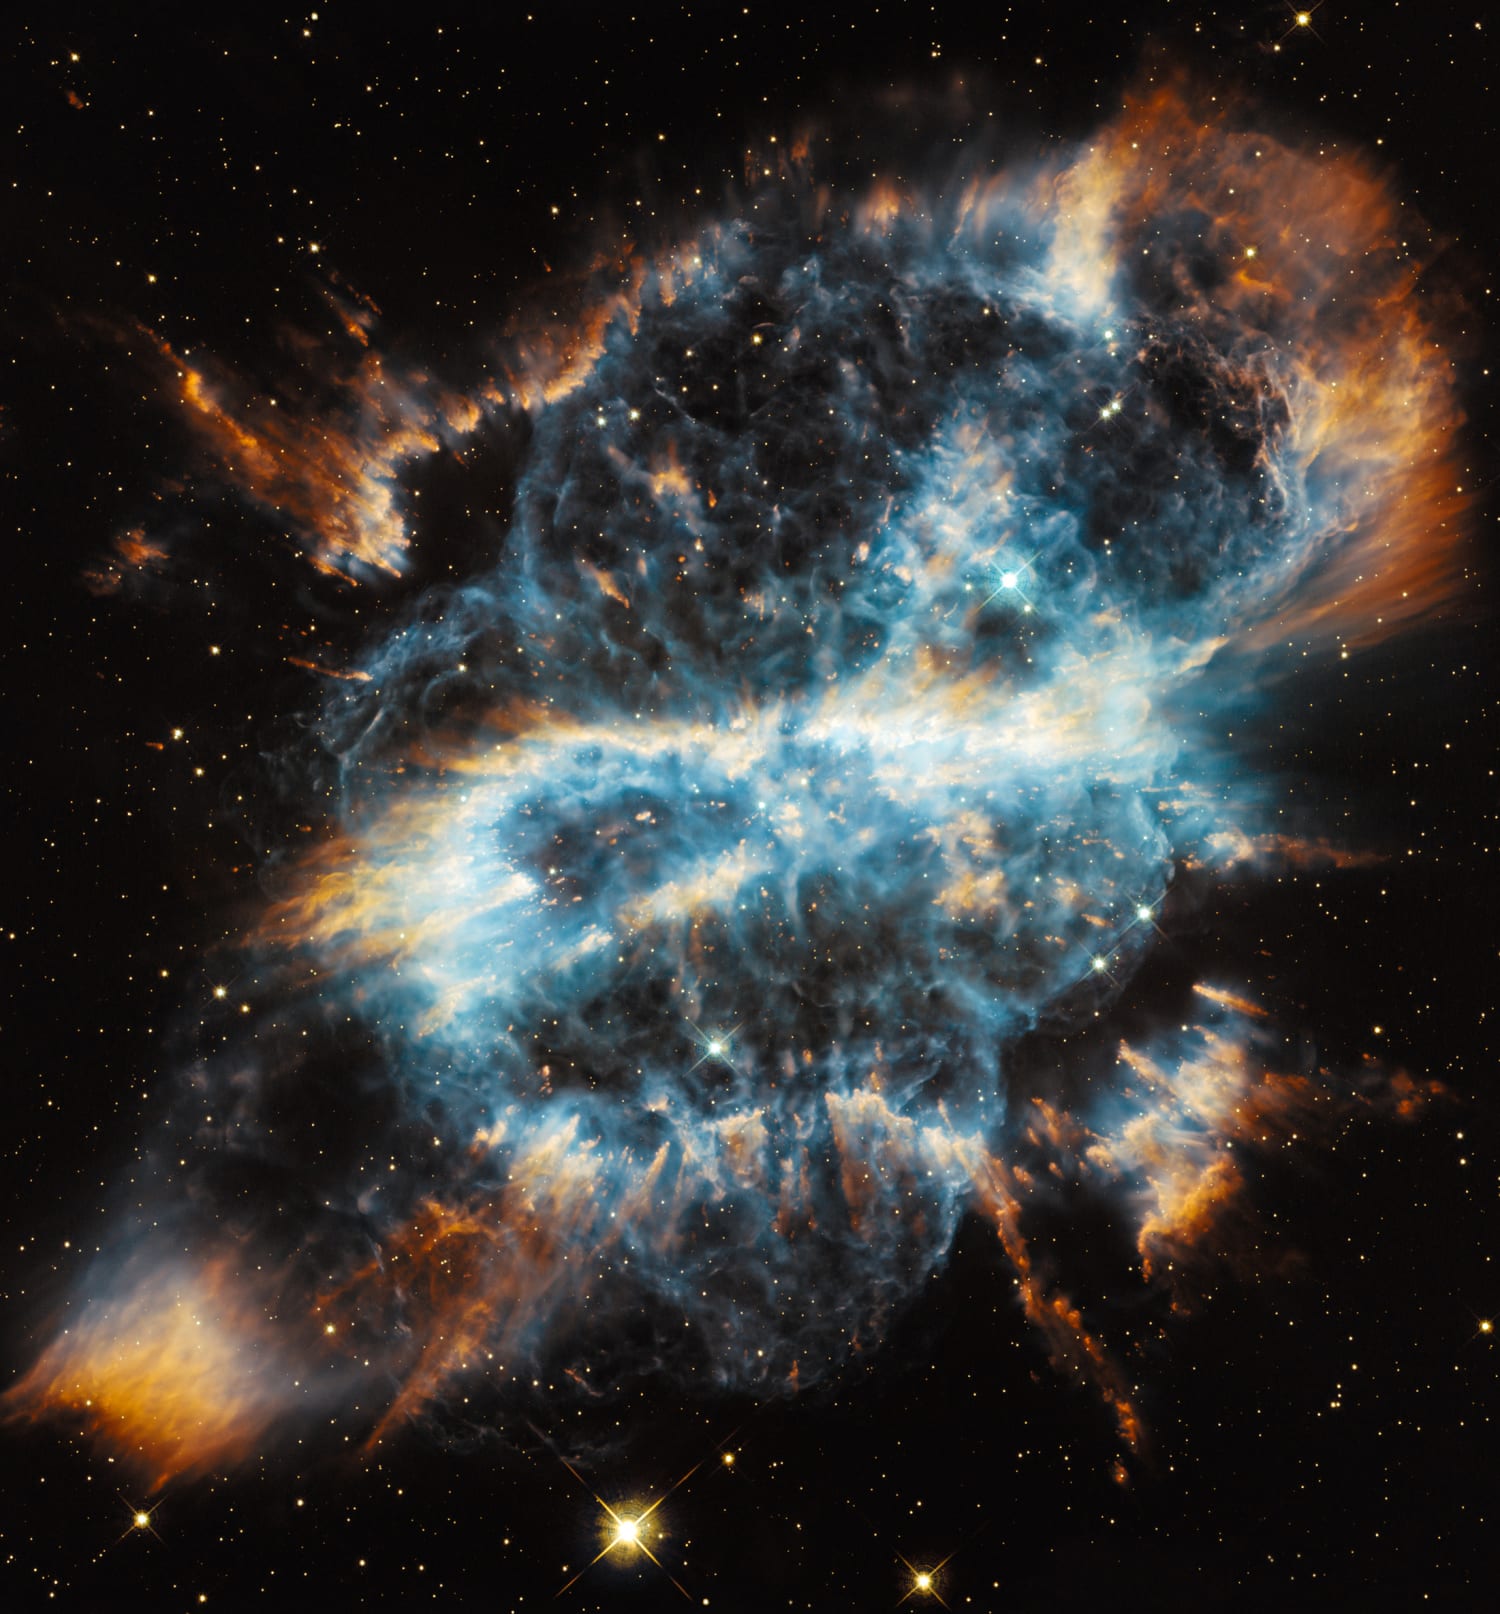 Hubble Space Telescope celebrates 28 years of mind-blowing space pictures